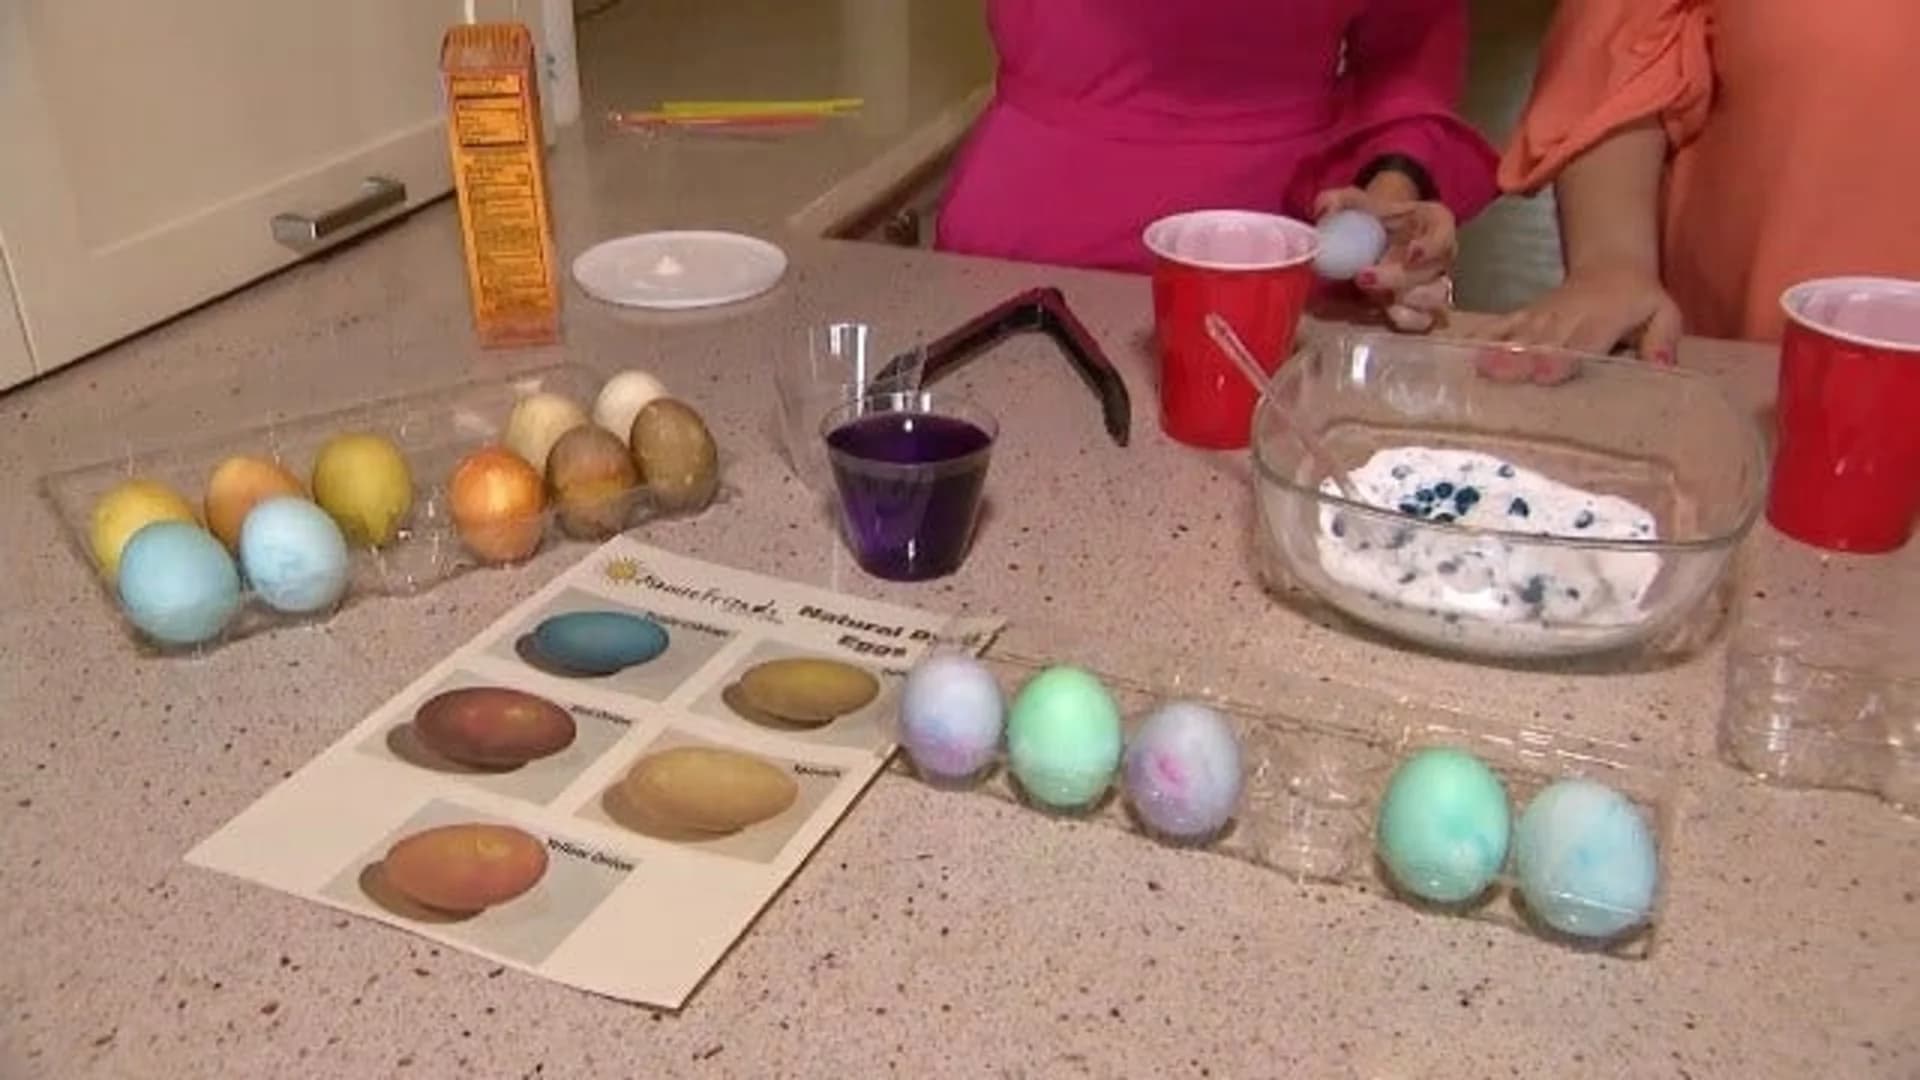 Get crafty this Easter with egg coloring, Peep s'mores and more!